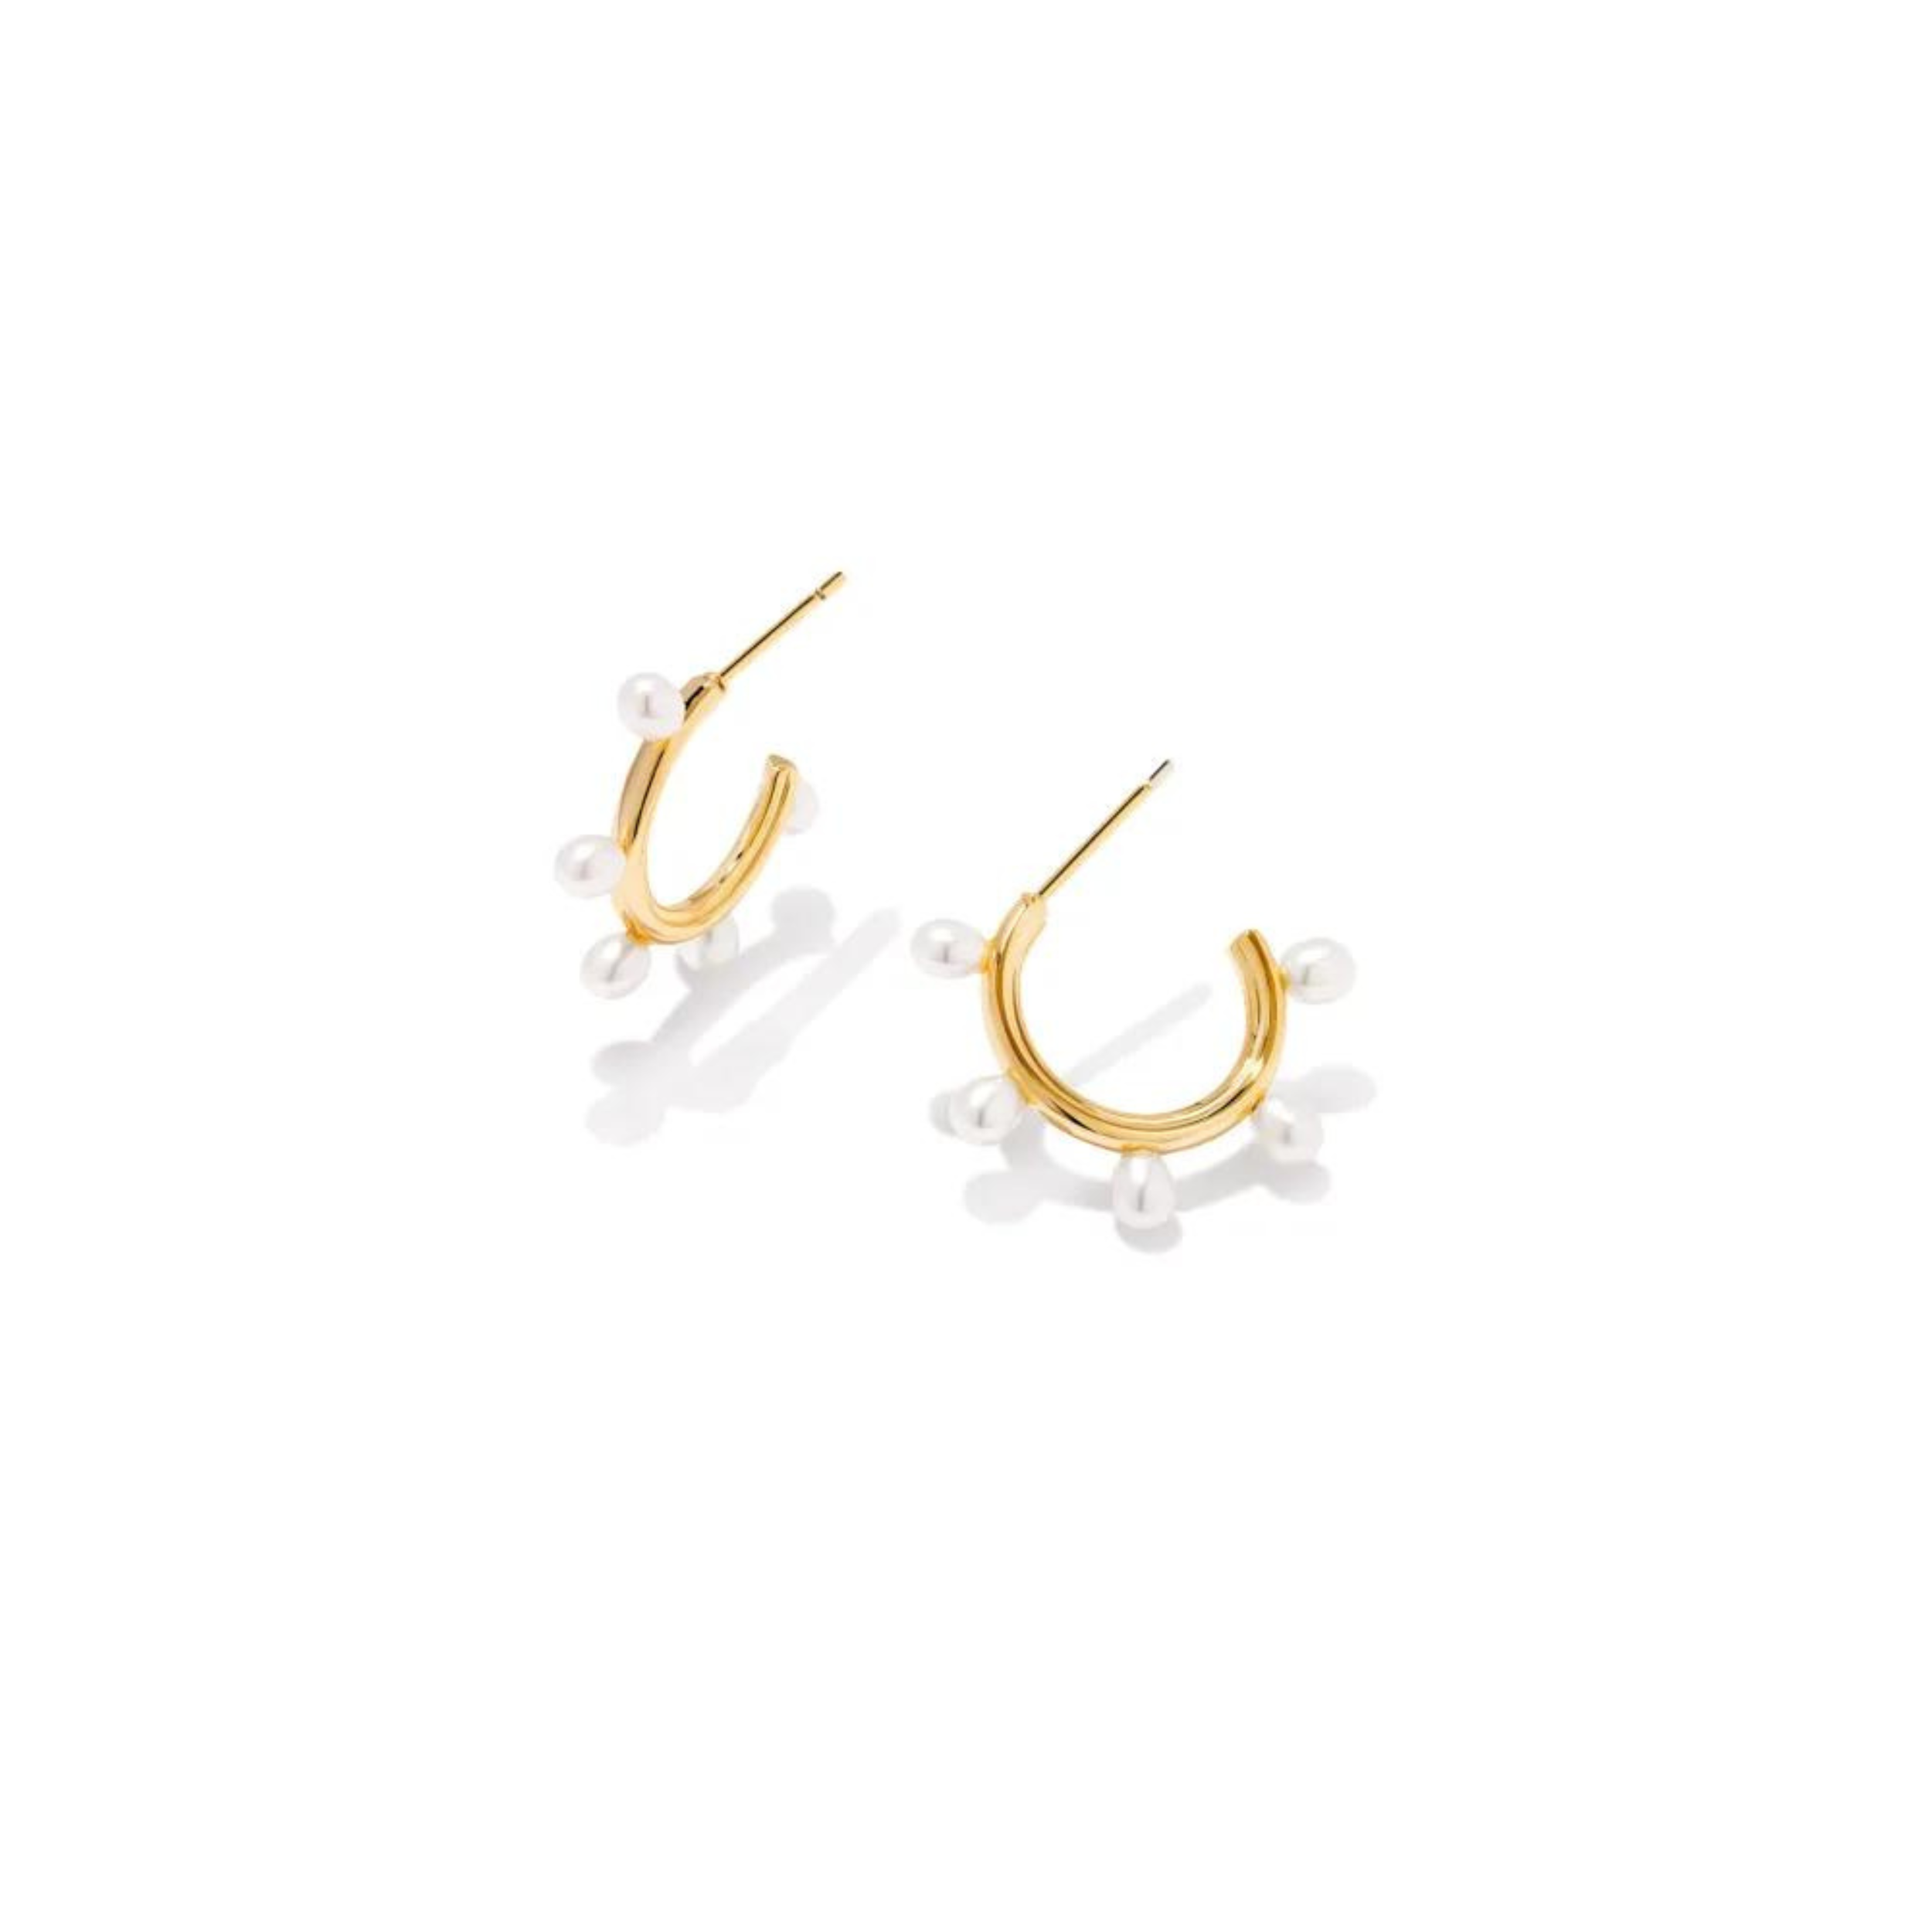 Kendra Scott | Leighton Gold Pearl Huggie Earrings in White Pearl - Giddy Up Glamour Boutique